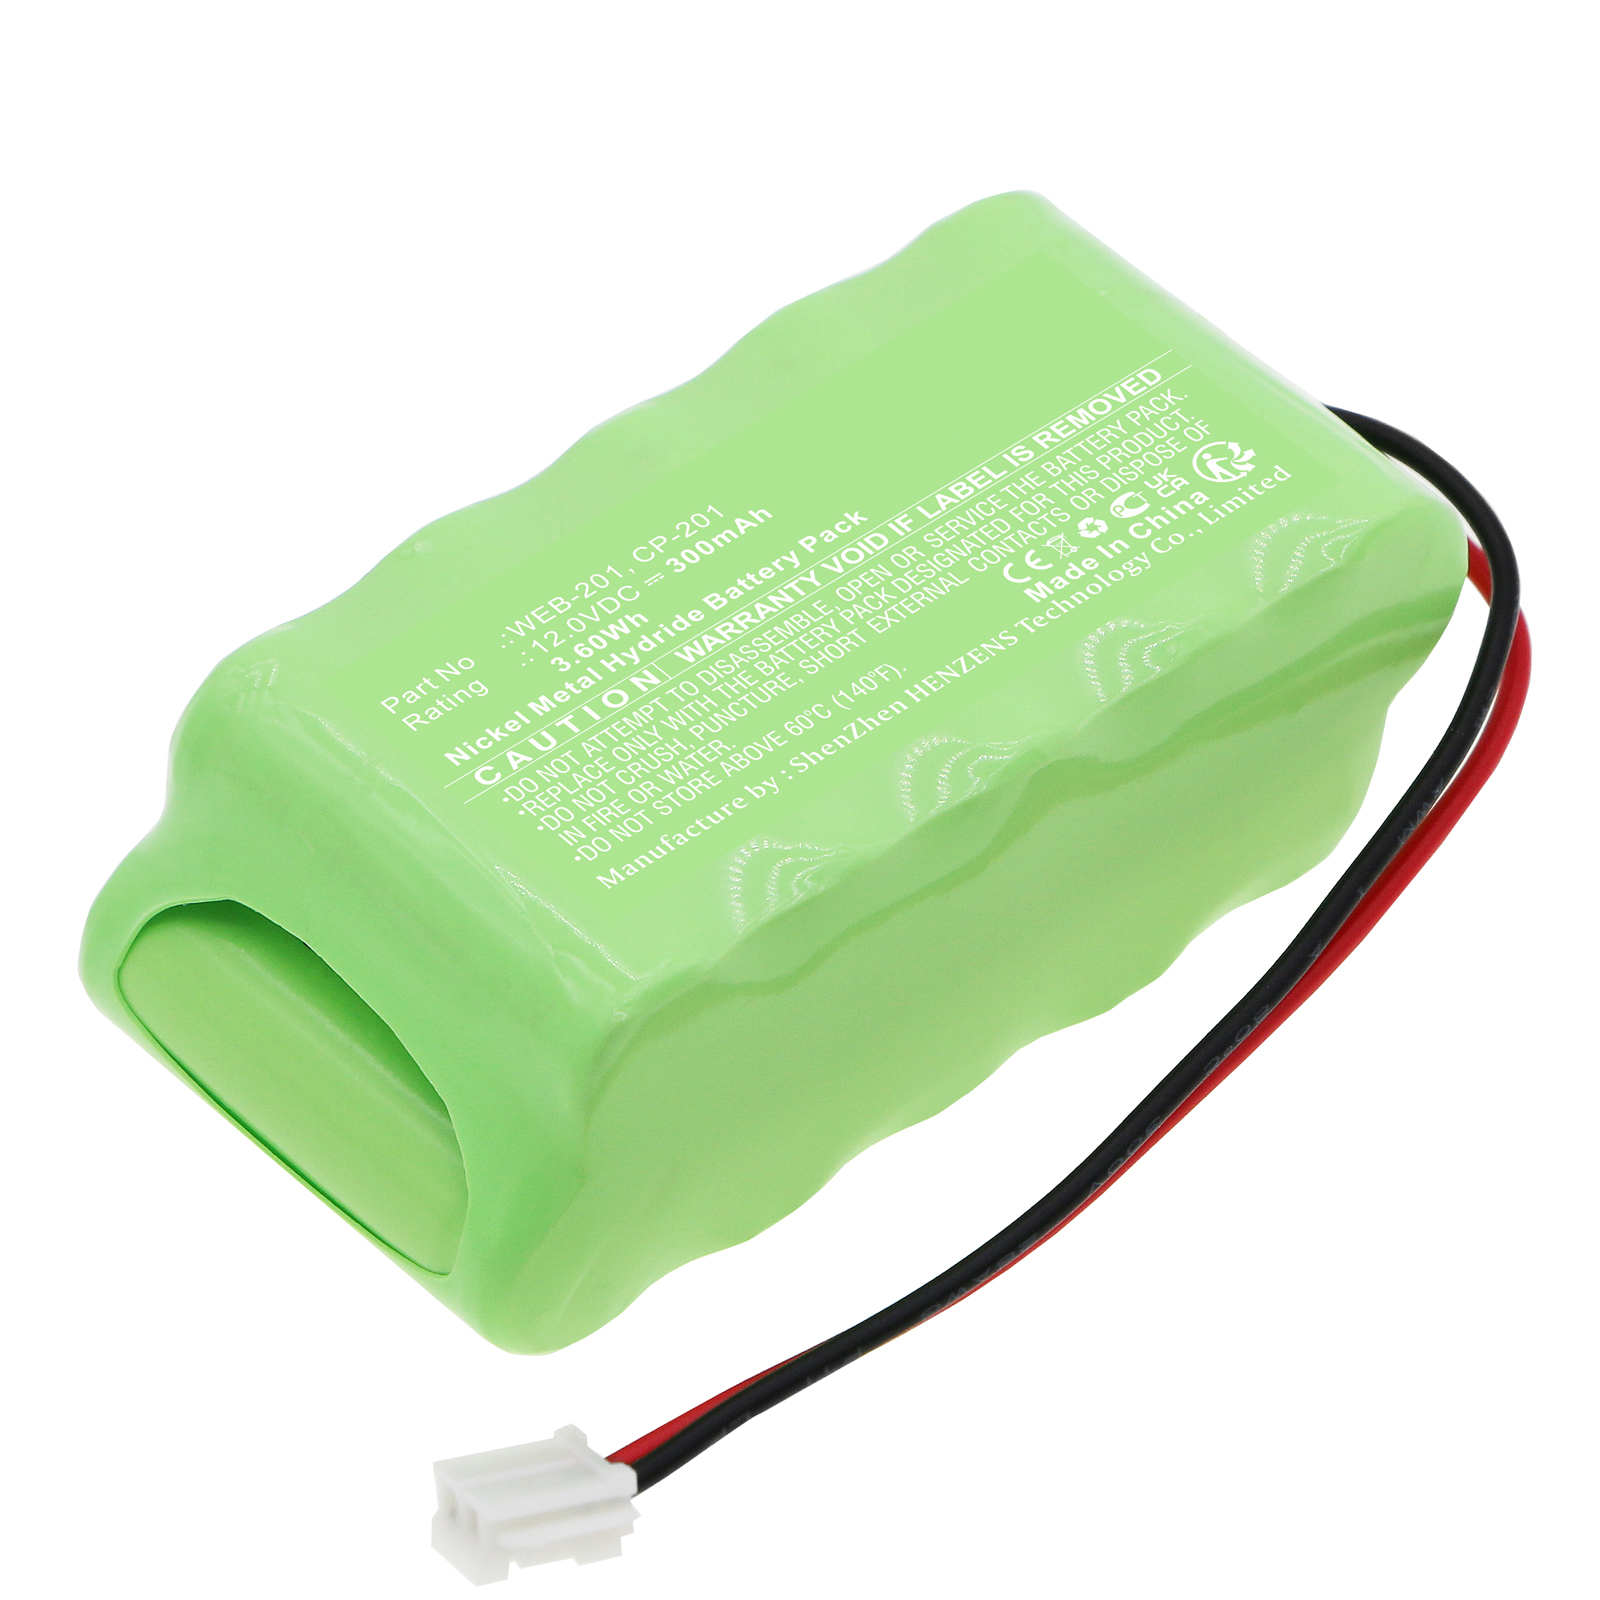 Synergy Digital PLC Battery, Compatible with Honeywell CP-201 PLC Battery (Ni-MH, 12V, 300mAh)